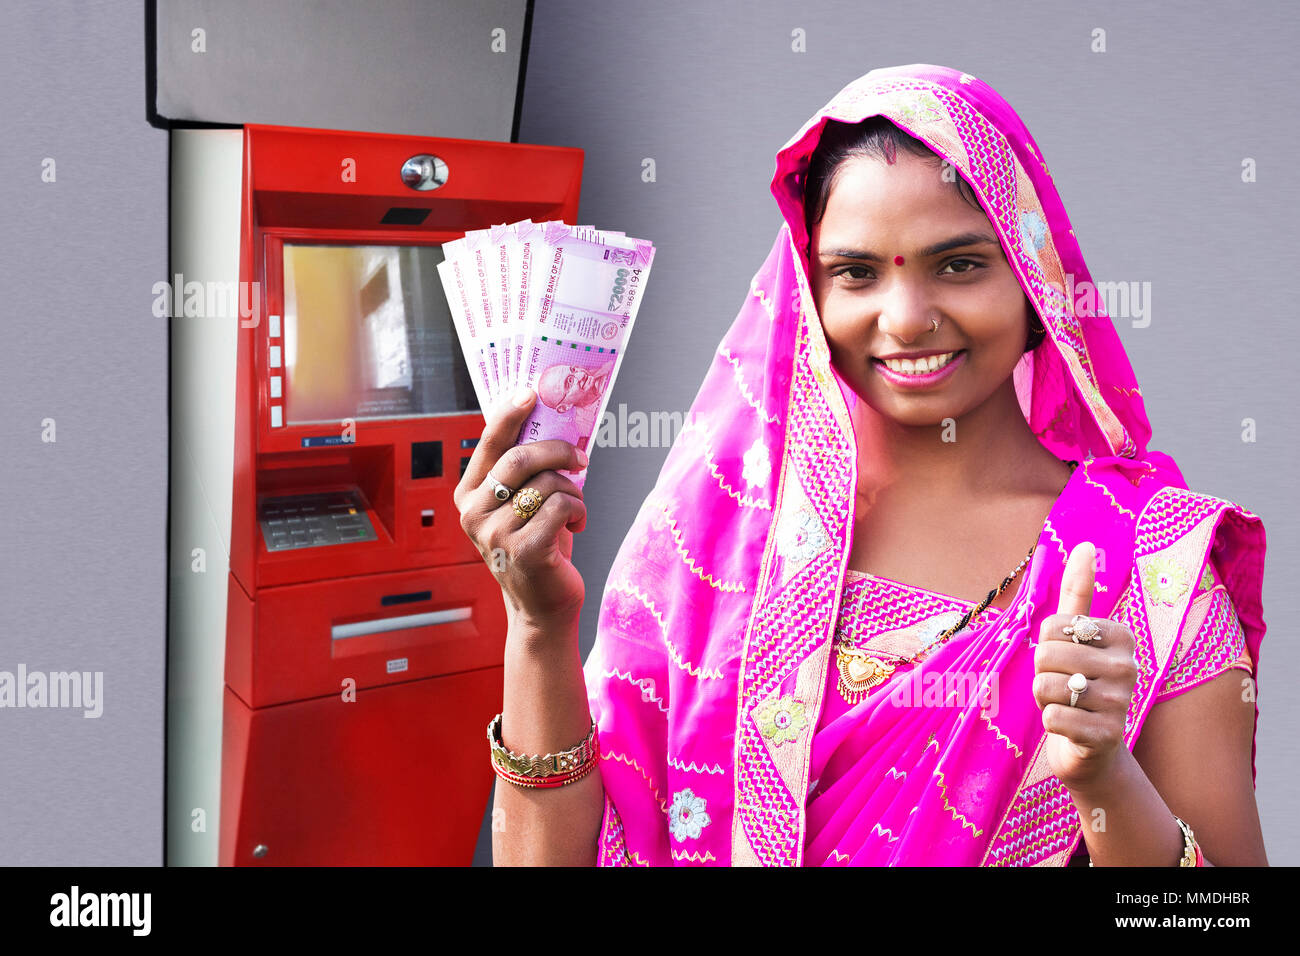 One Rural Female Showing Thumbs-up With Indian Rupees Cash Withdraw ATM Stock Photo